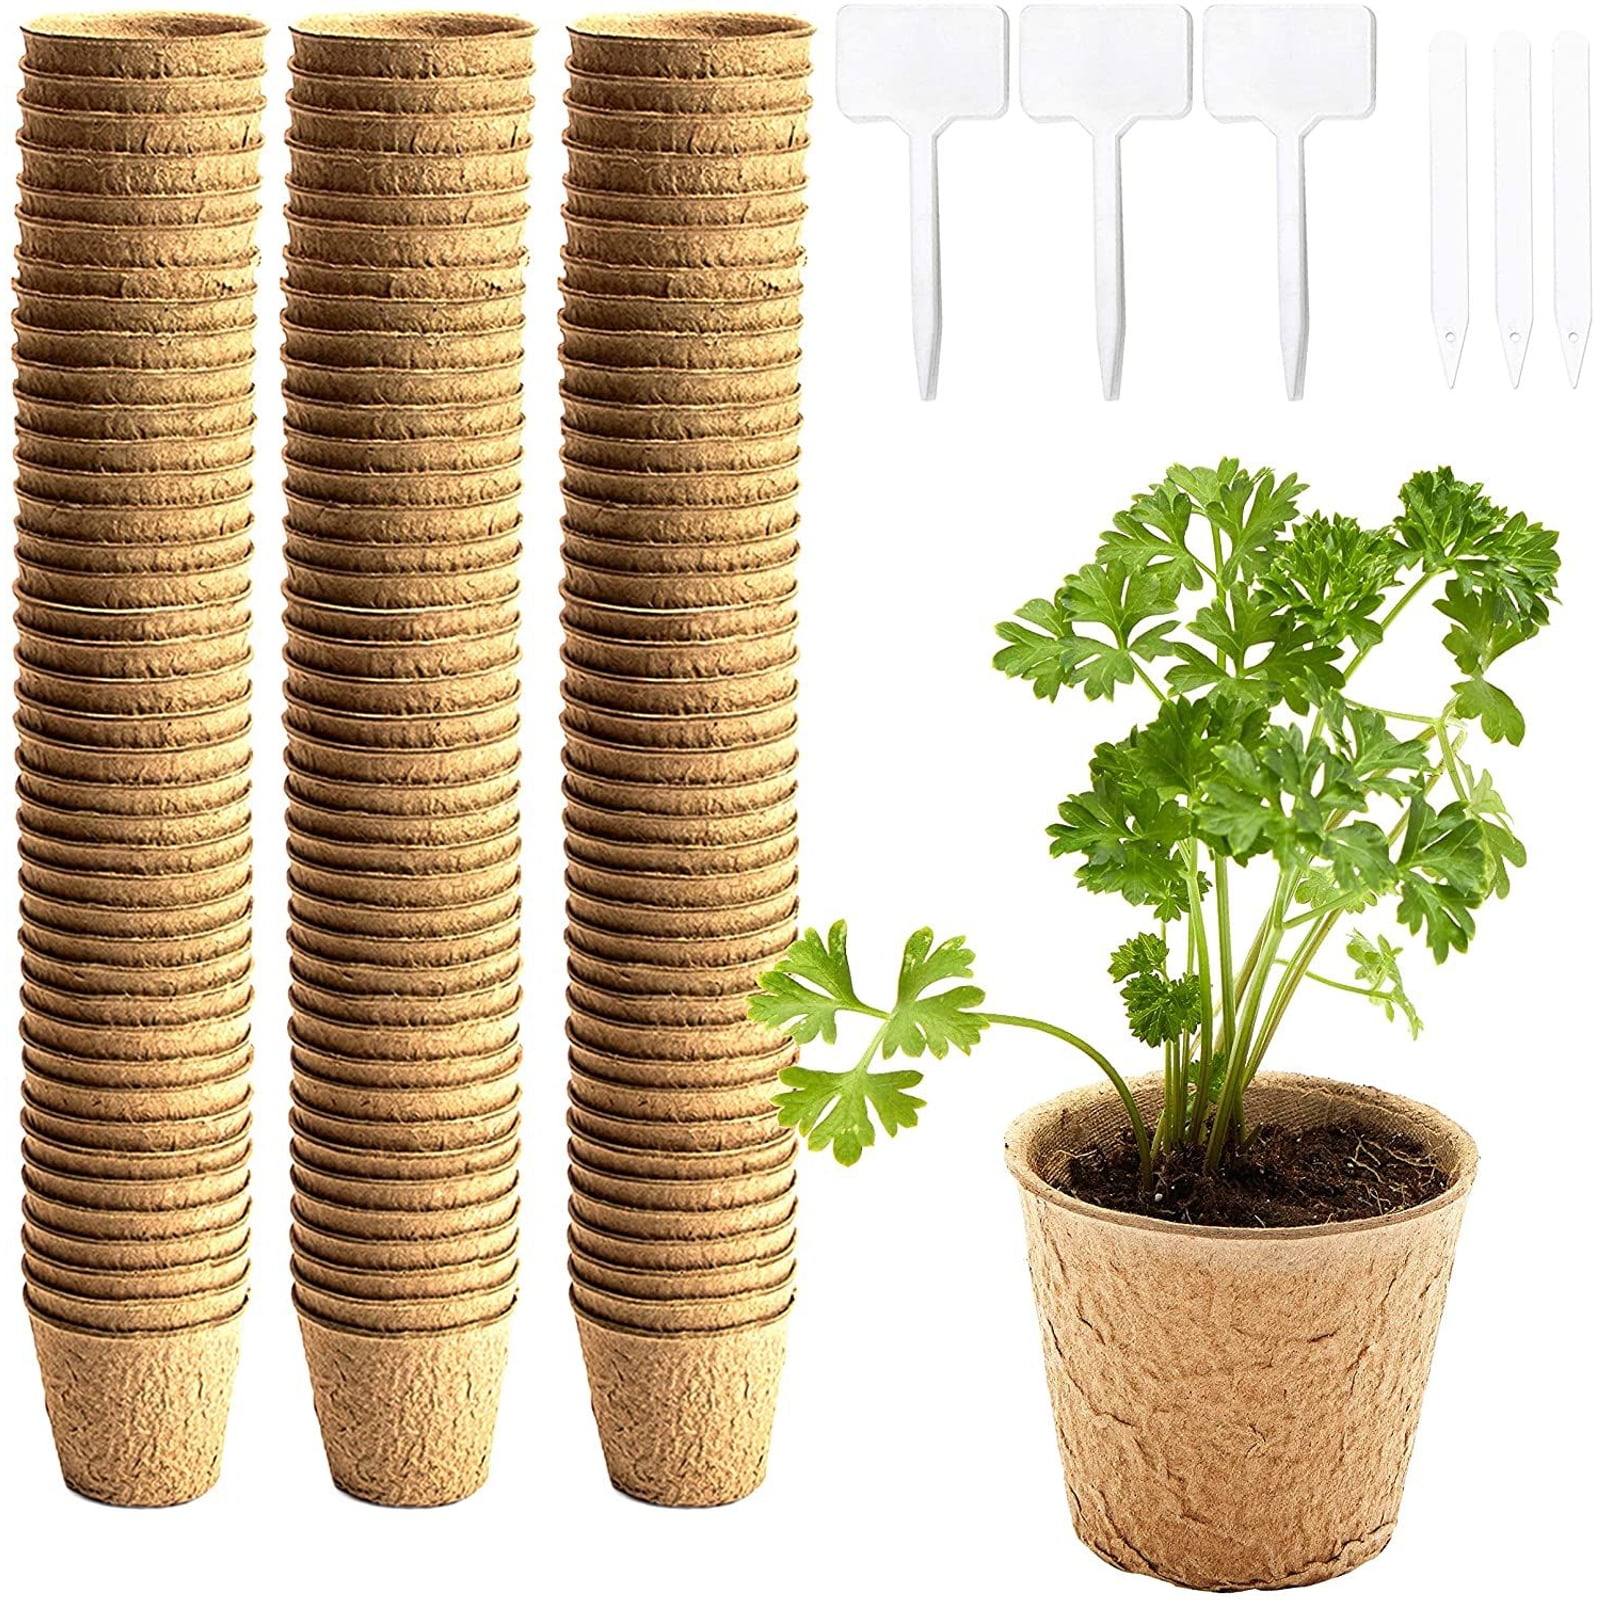 Aohcae Seed Starter Trays 2pcs Seedlings Dibbers and 50pcs Plant Labels for Home Garden Greenhouse 12pcs 10 Cells Biodegradable Pots Seed Starter Trays 